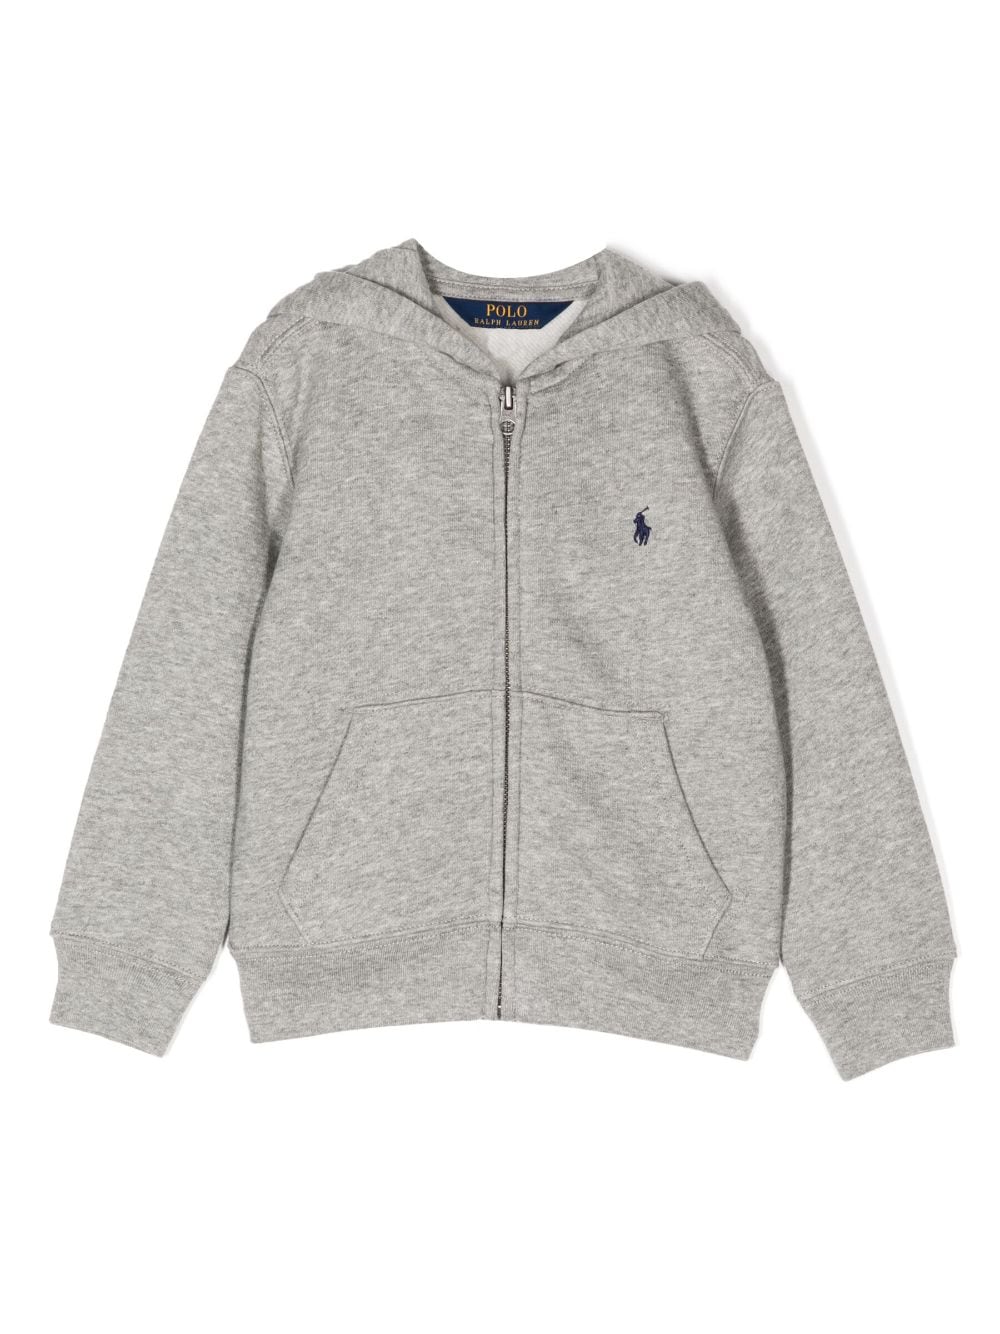 Polo Pony zip-up hoodie<BR/><BR/>